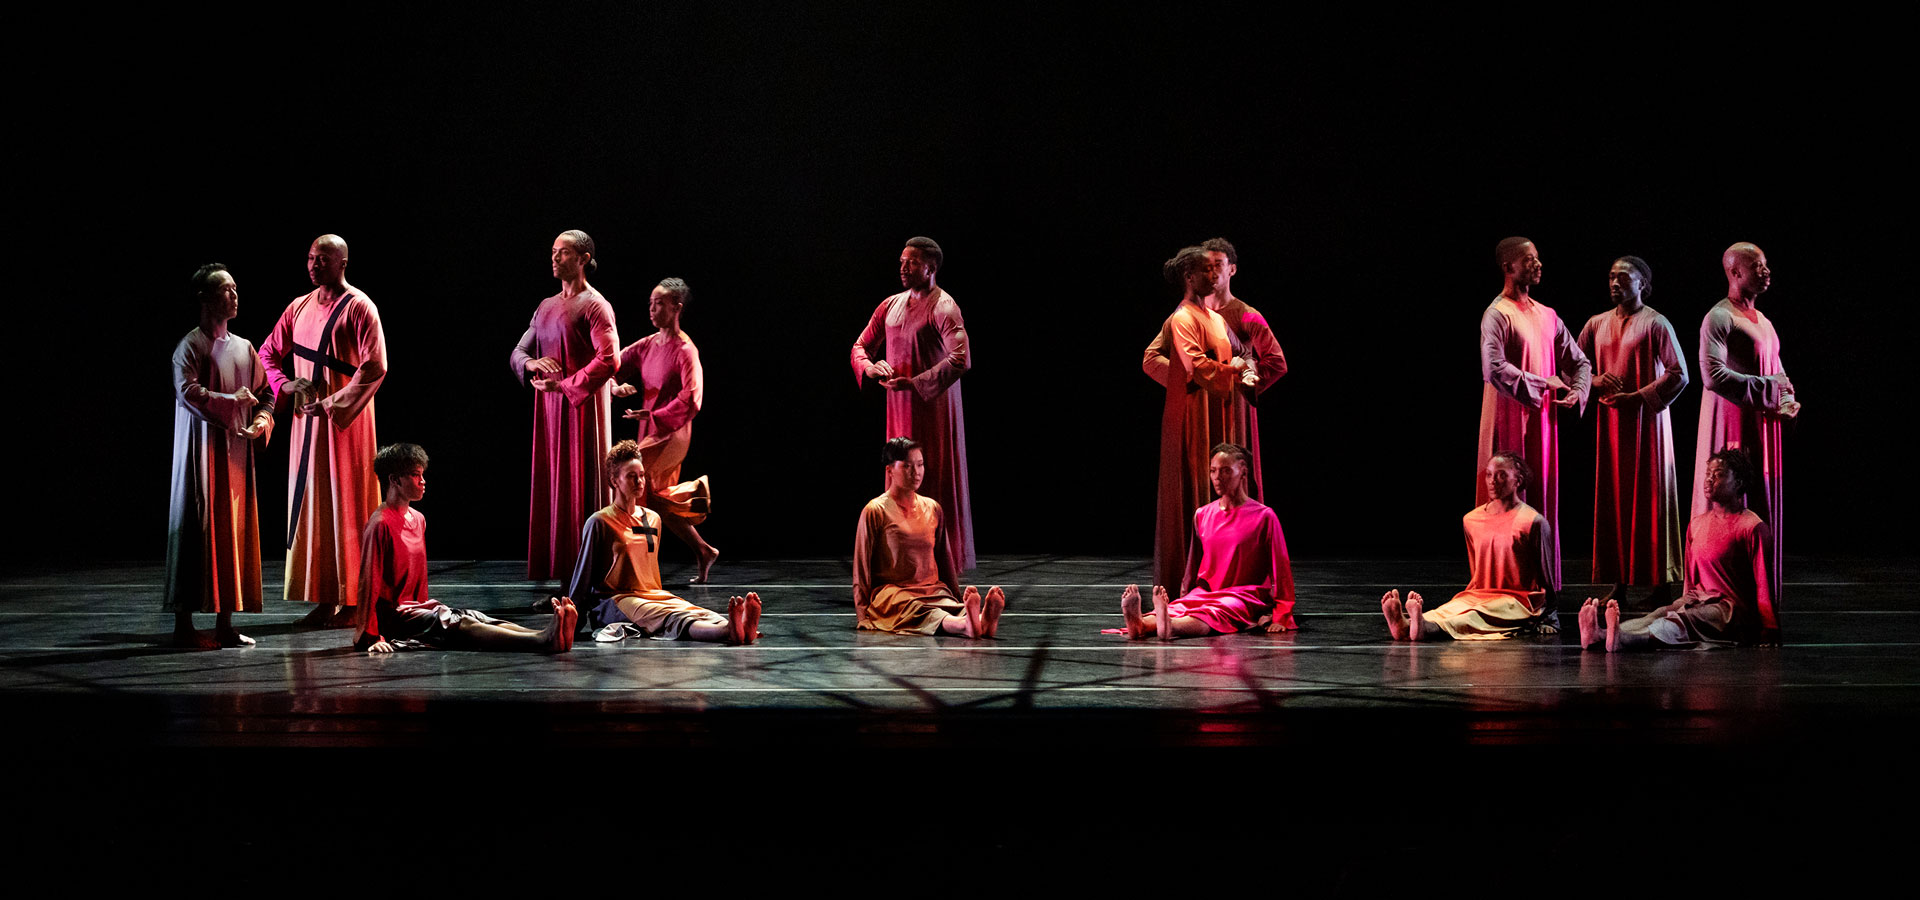 Alvin Ailey American Dance Theater performing Mass